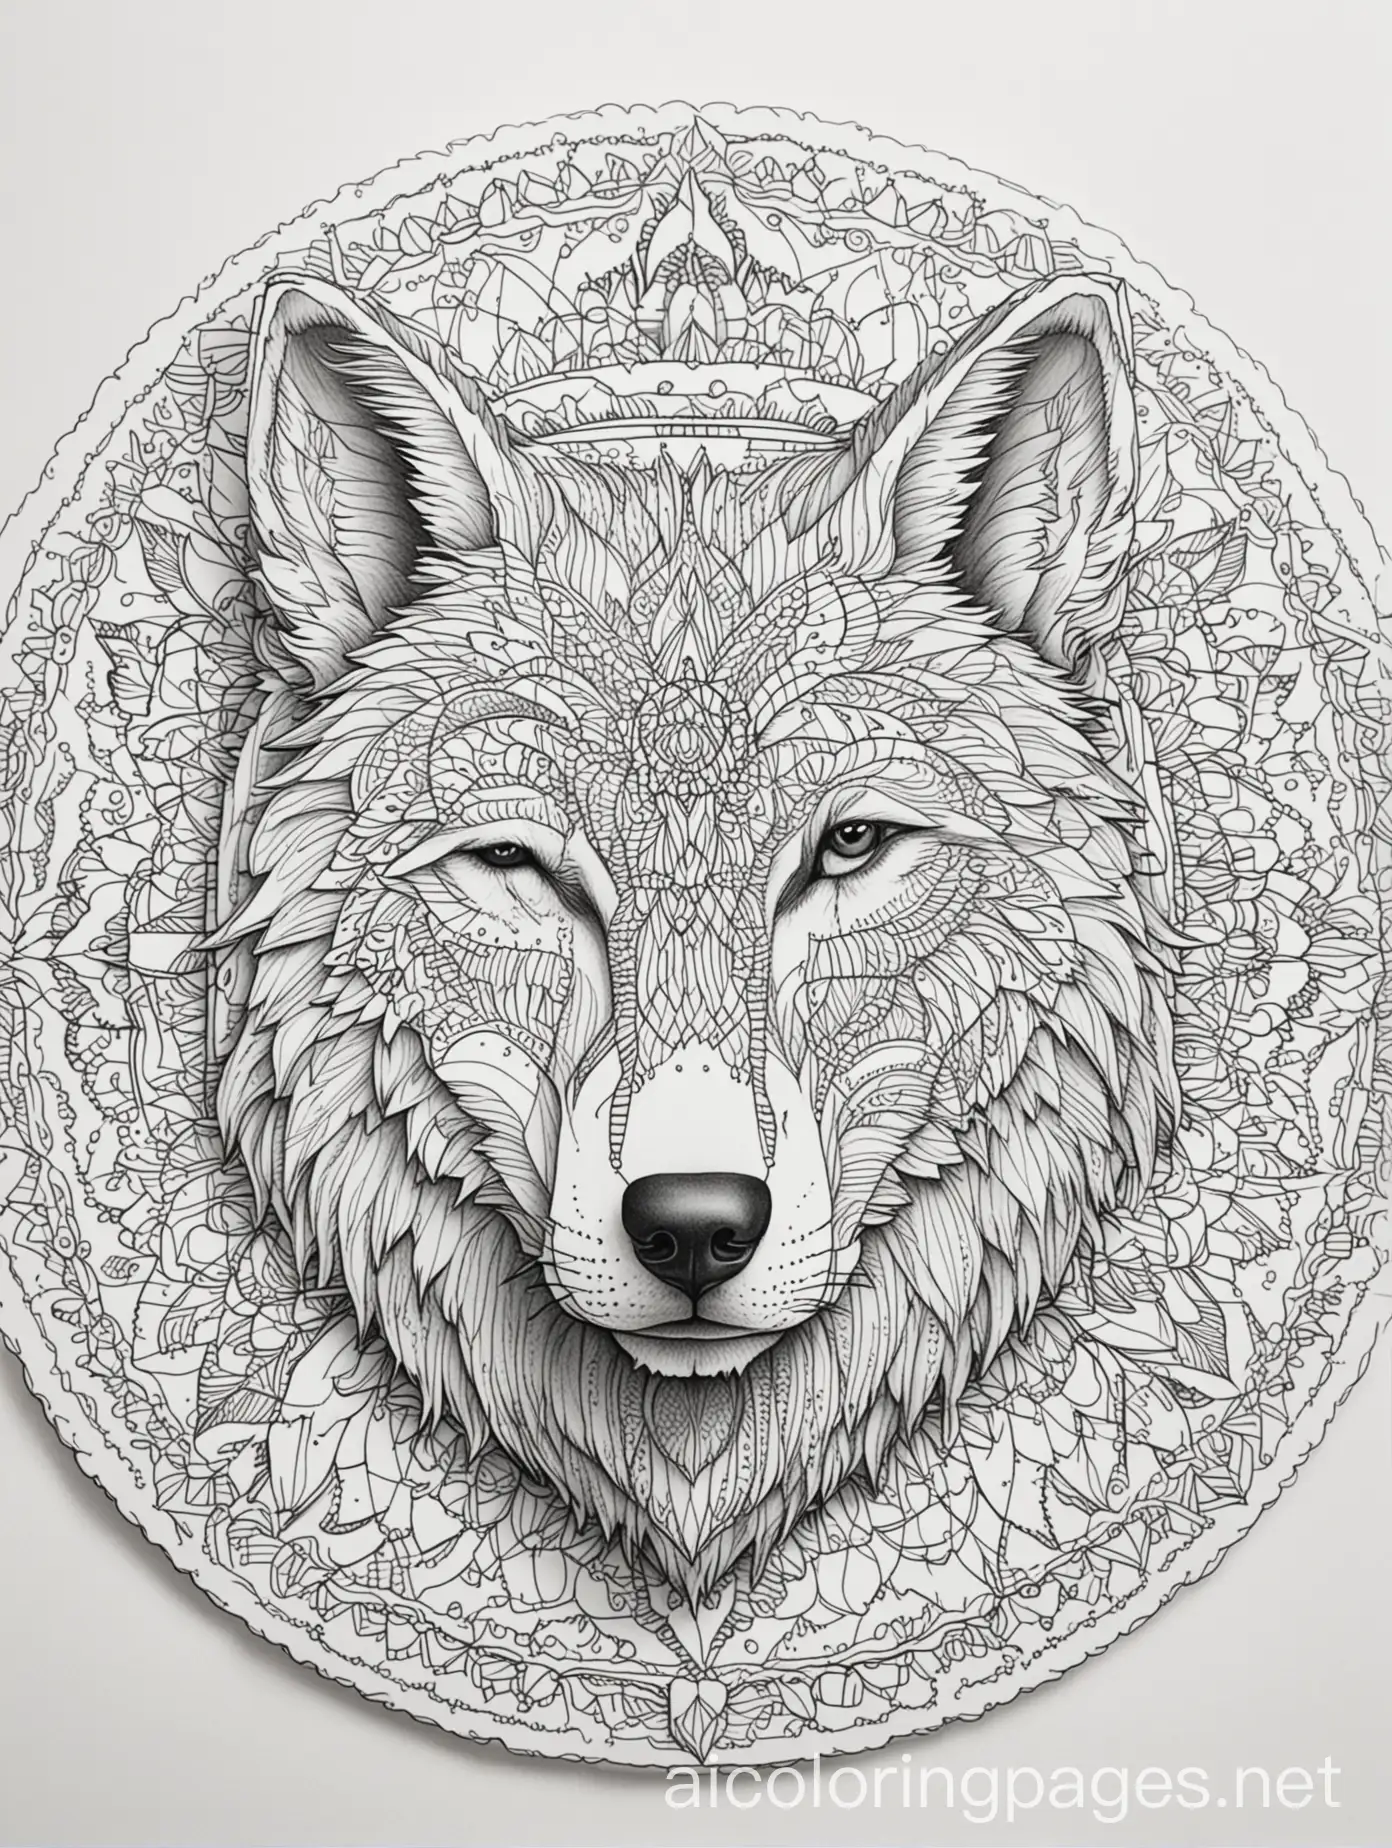 A Wolf mandala, Coloring Page, black and white, line art, white background, Simplicity, Ample White Space. The background of the coloring page is plain white to make it easy for young children to color within the lines. The outlines of all the subjects are easy to distinguish, making it simple for kids to color without too much difficulty